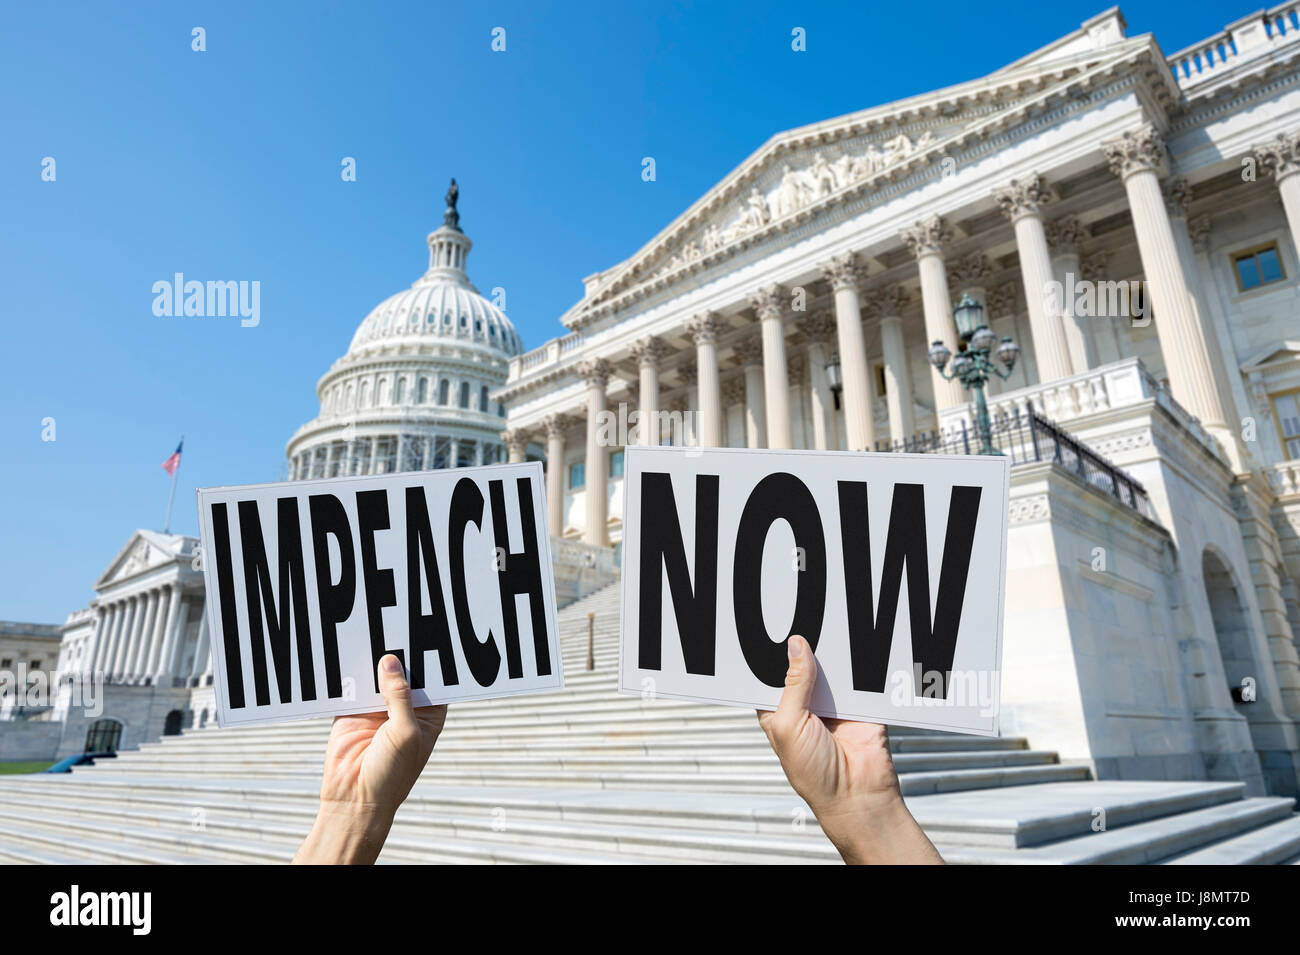 Hands of protesters holding signs on Capitol Hill demanding IMPEACH NOW referring to the president of the United States of America Stock Photo